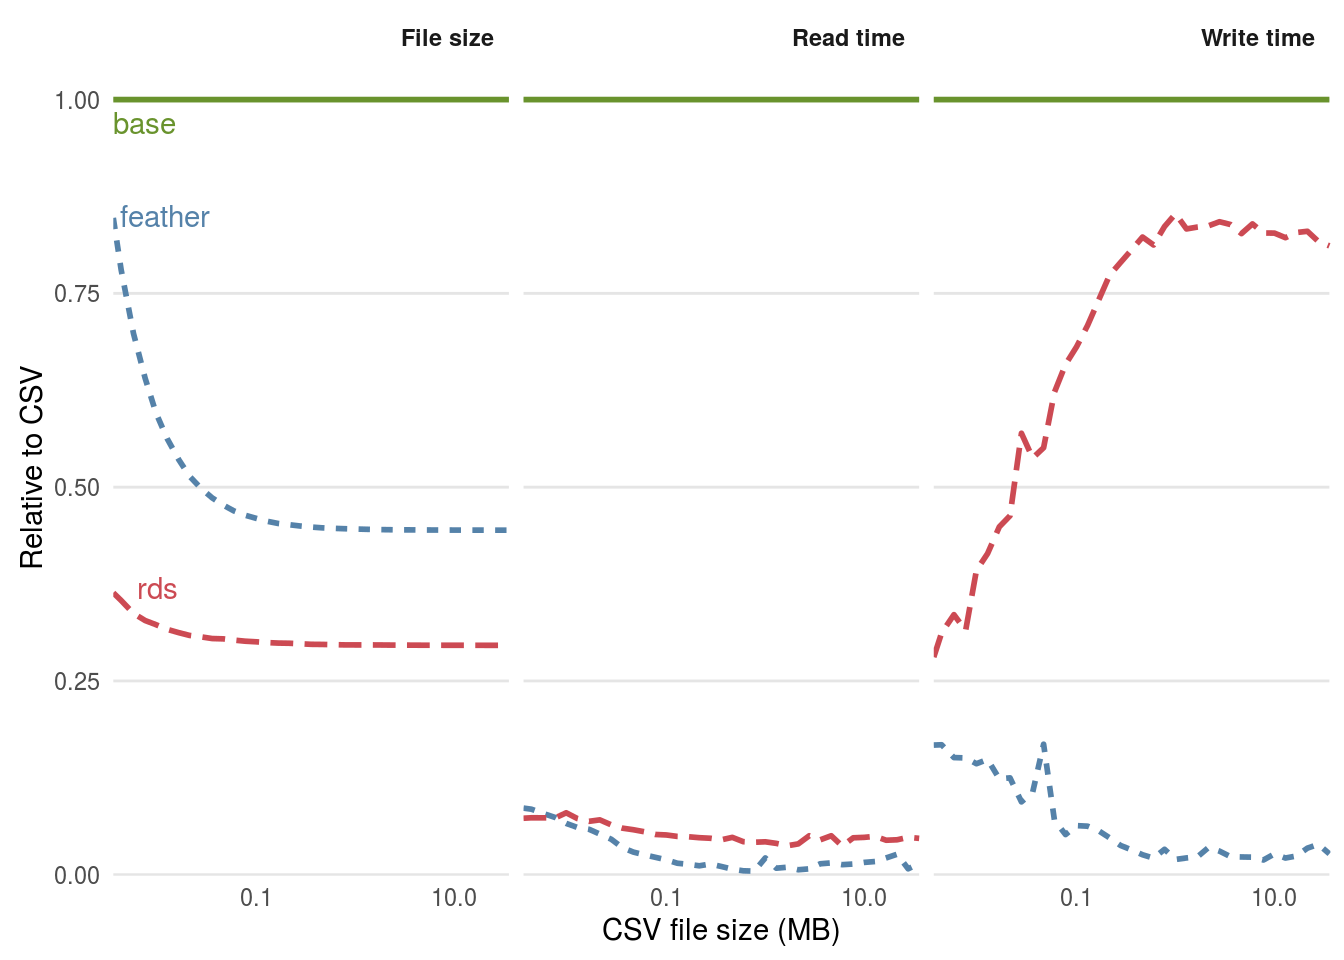 Comparison of the performance of binary formats for reading and writing datasets with 20 column with the plain text format CSV. The functions used to read the files were read.csv(), readRDS() and feather::read_feather() respectively.  The functions used to write the files were write.csv(), saveRDS() and feather::write_feather(). 